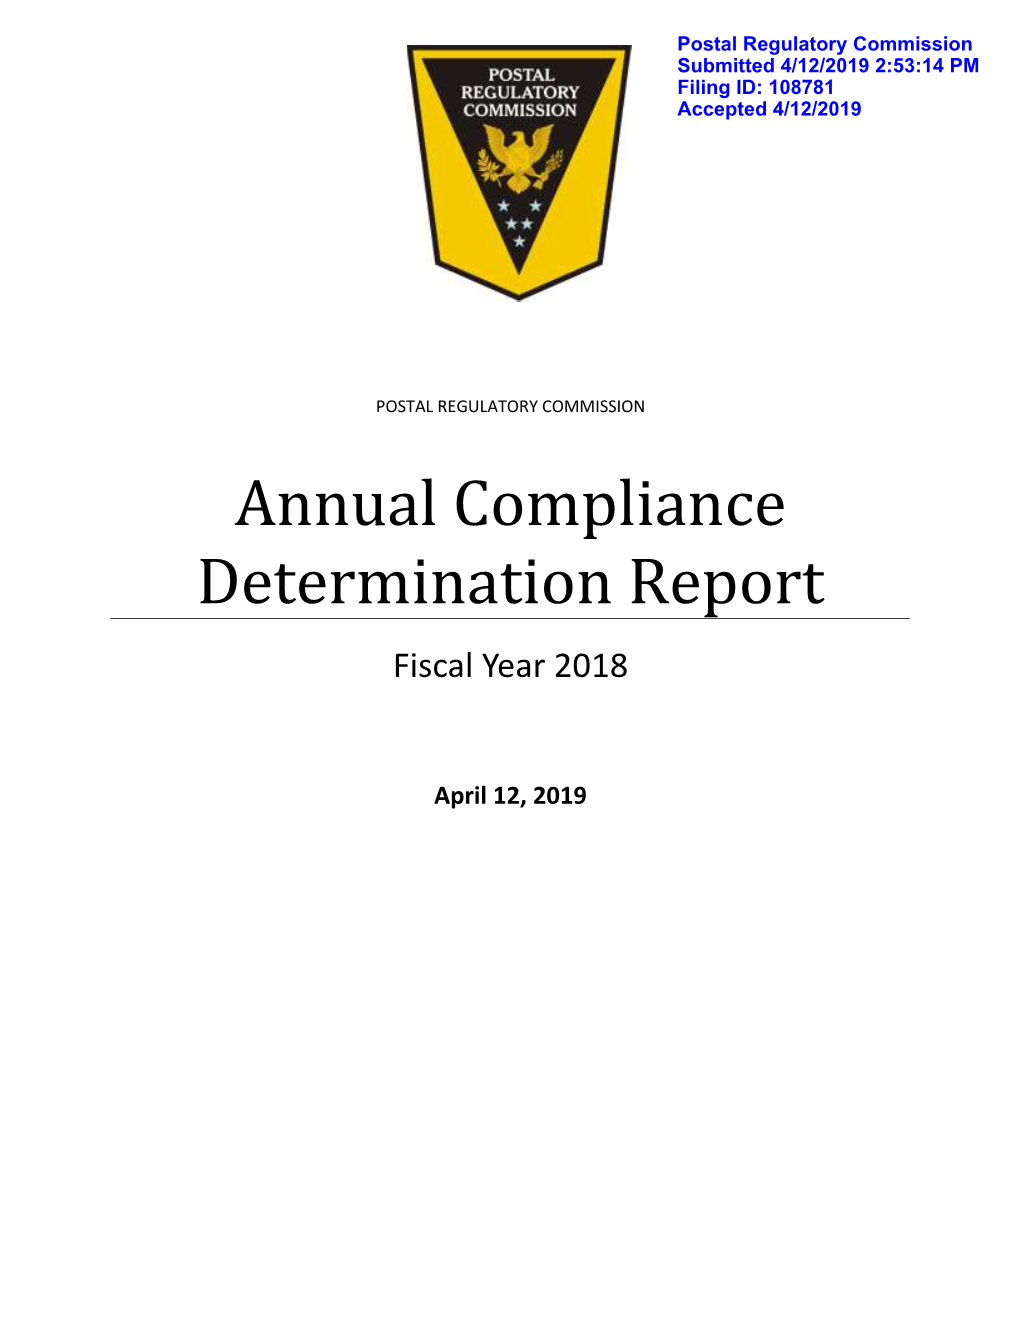 Annual Compliance Determination Report and How We Can Improve Its Readability and Value